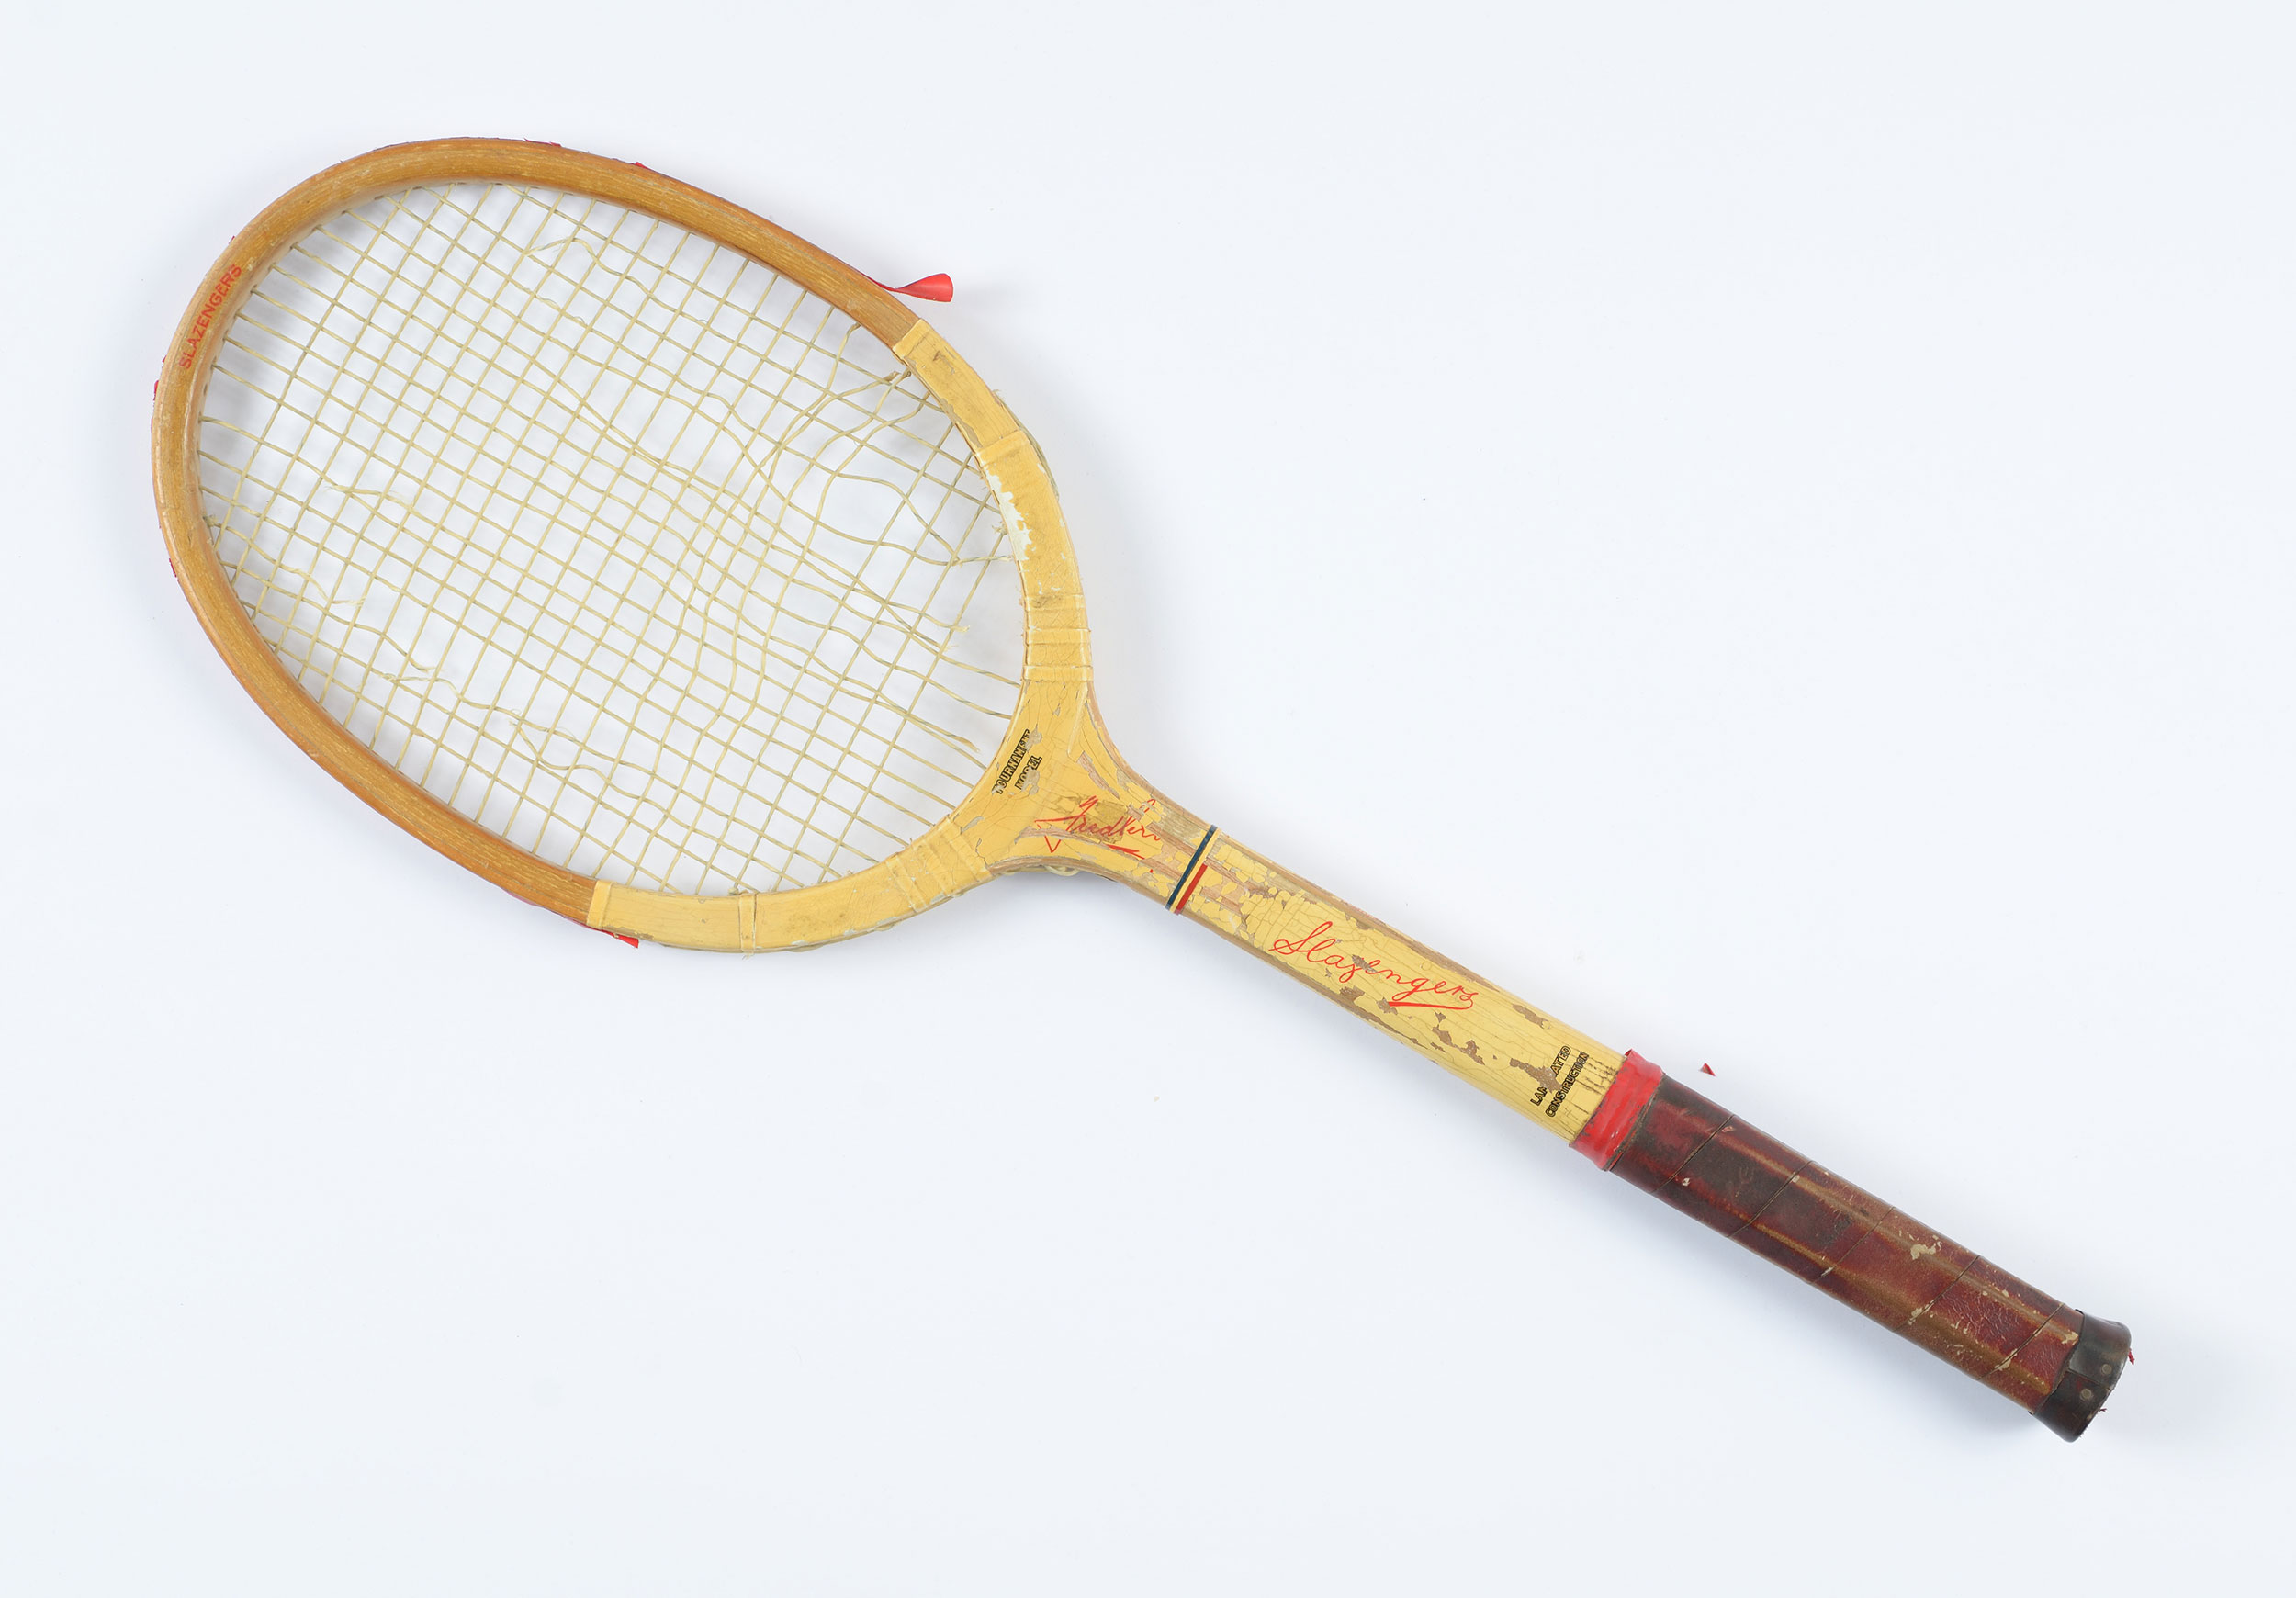 The tennis racquet belonged to Dr. Shimon Schmorak and his wife Sofia